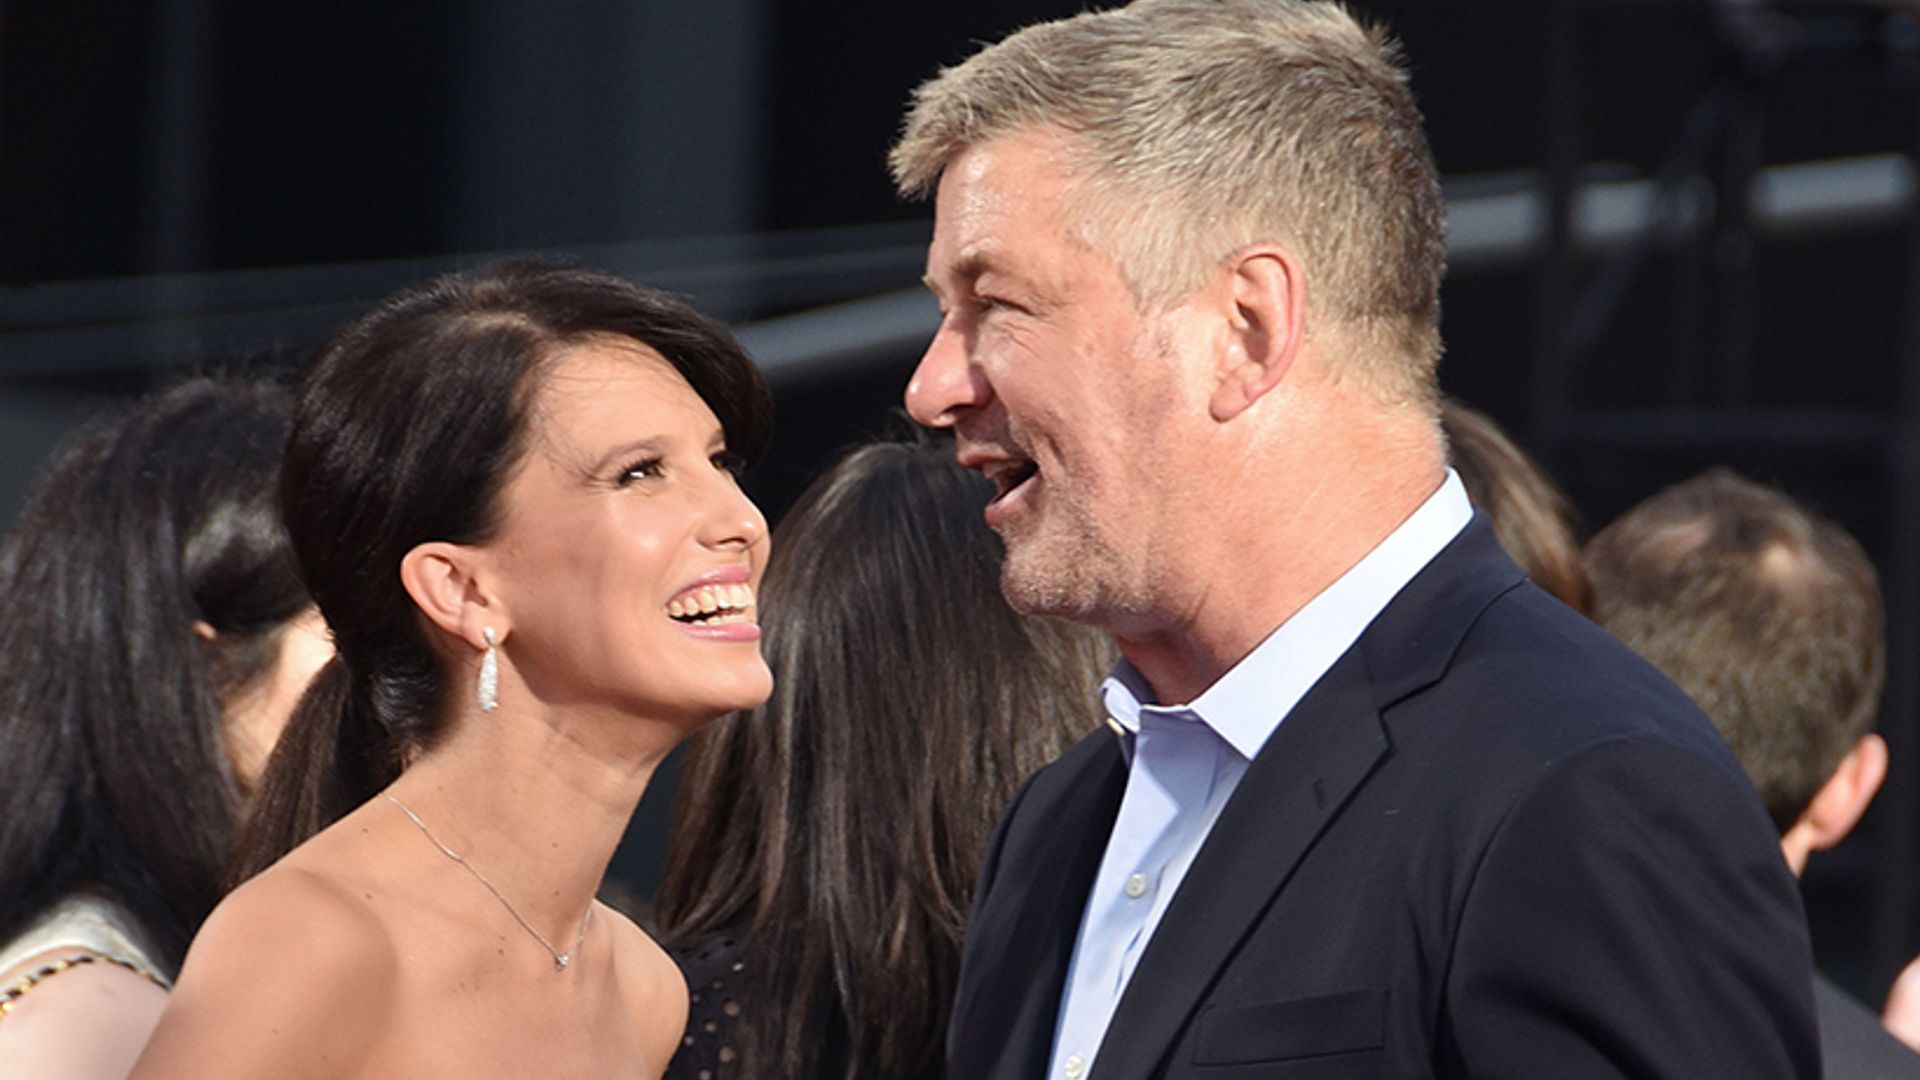 Alec and Hilaria Baldwin dote on baby Leo - see the sweet snaps